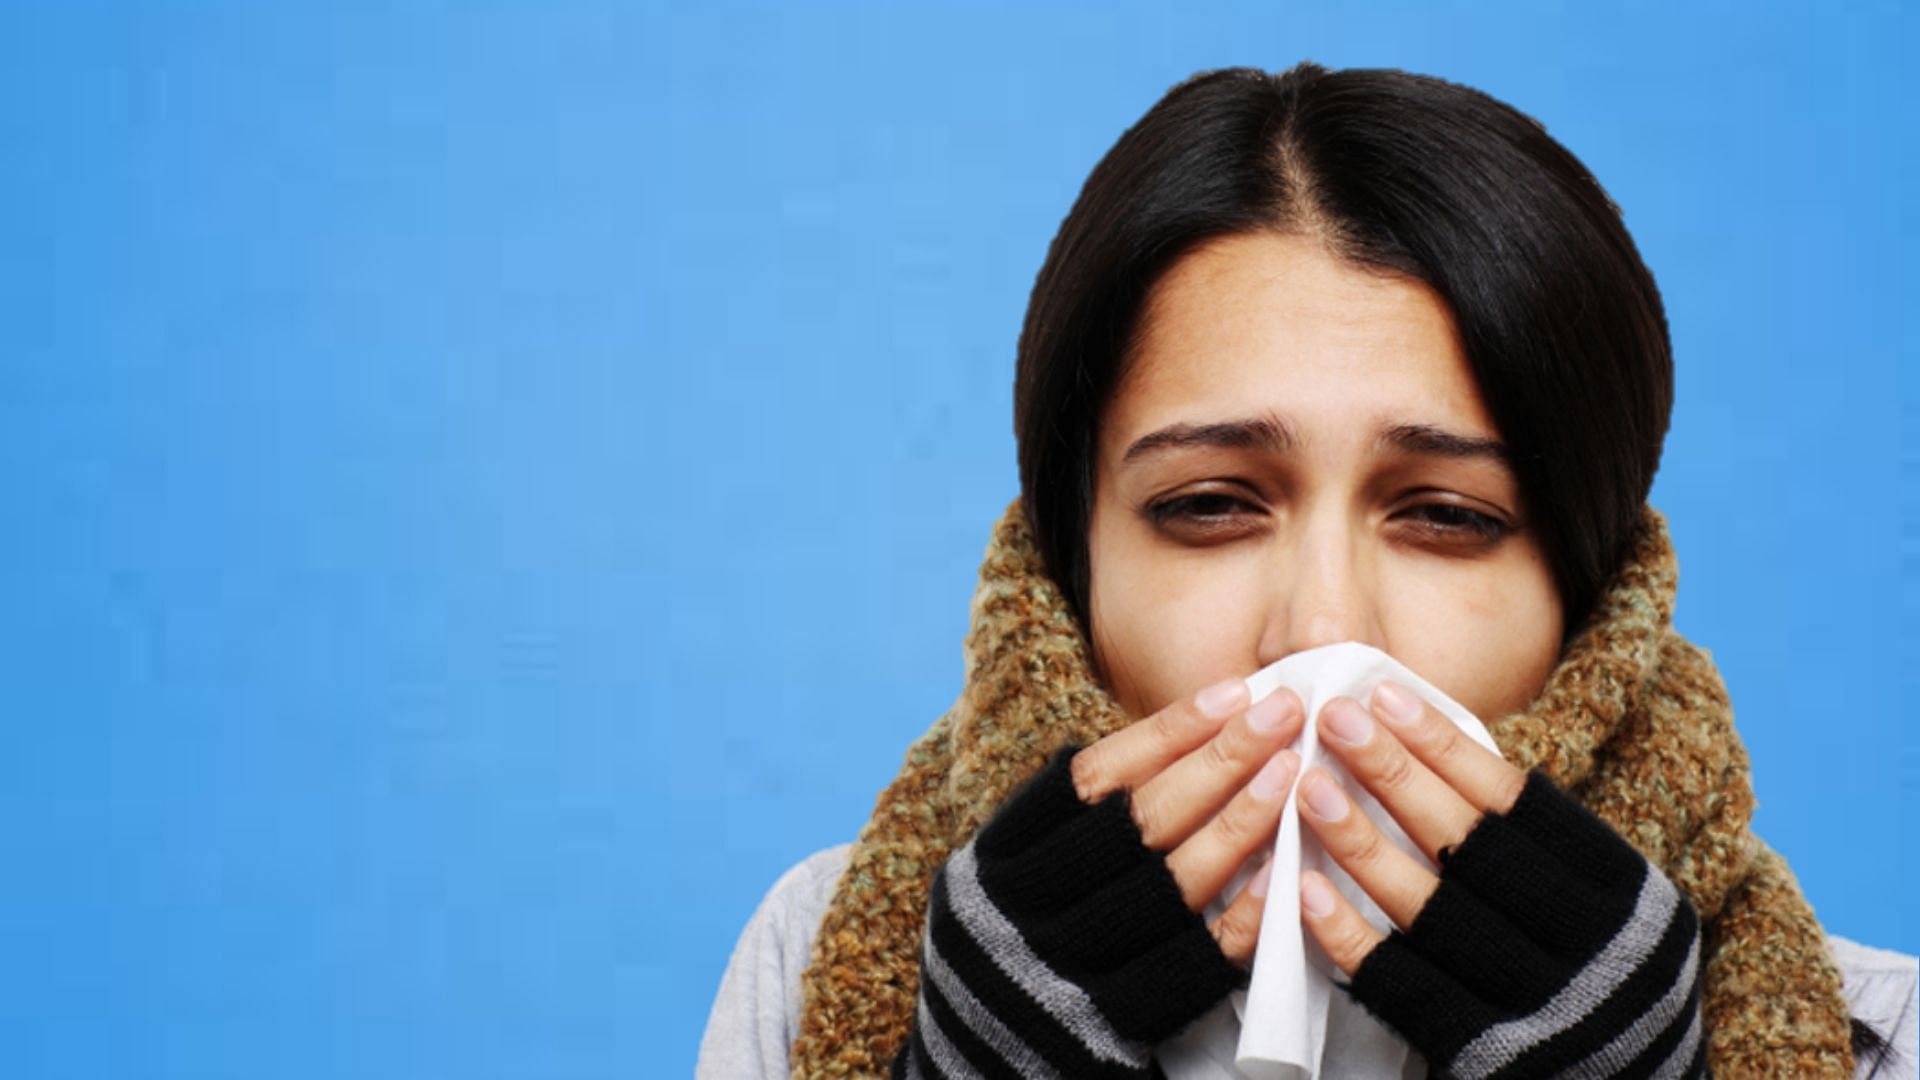 A cold presents with a runny nose or congestion.